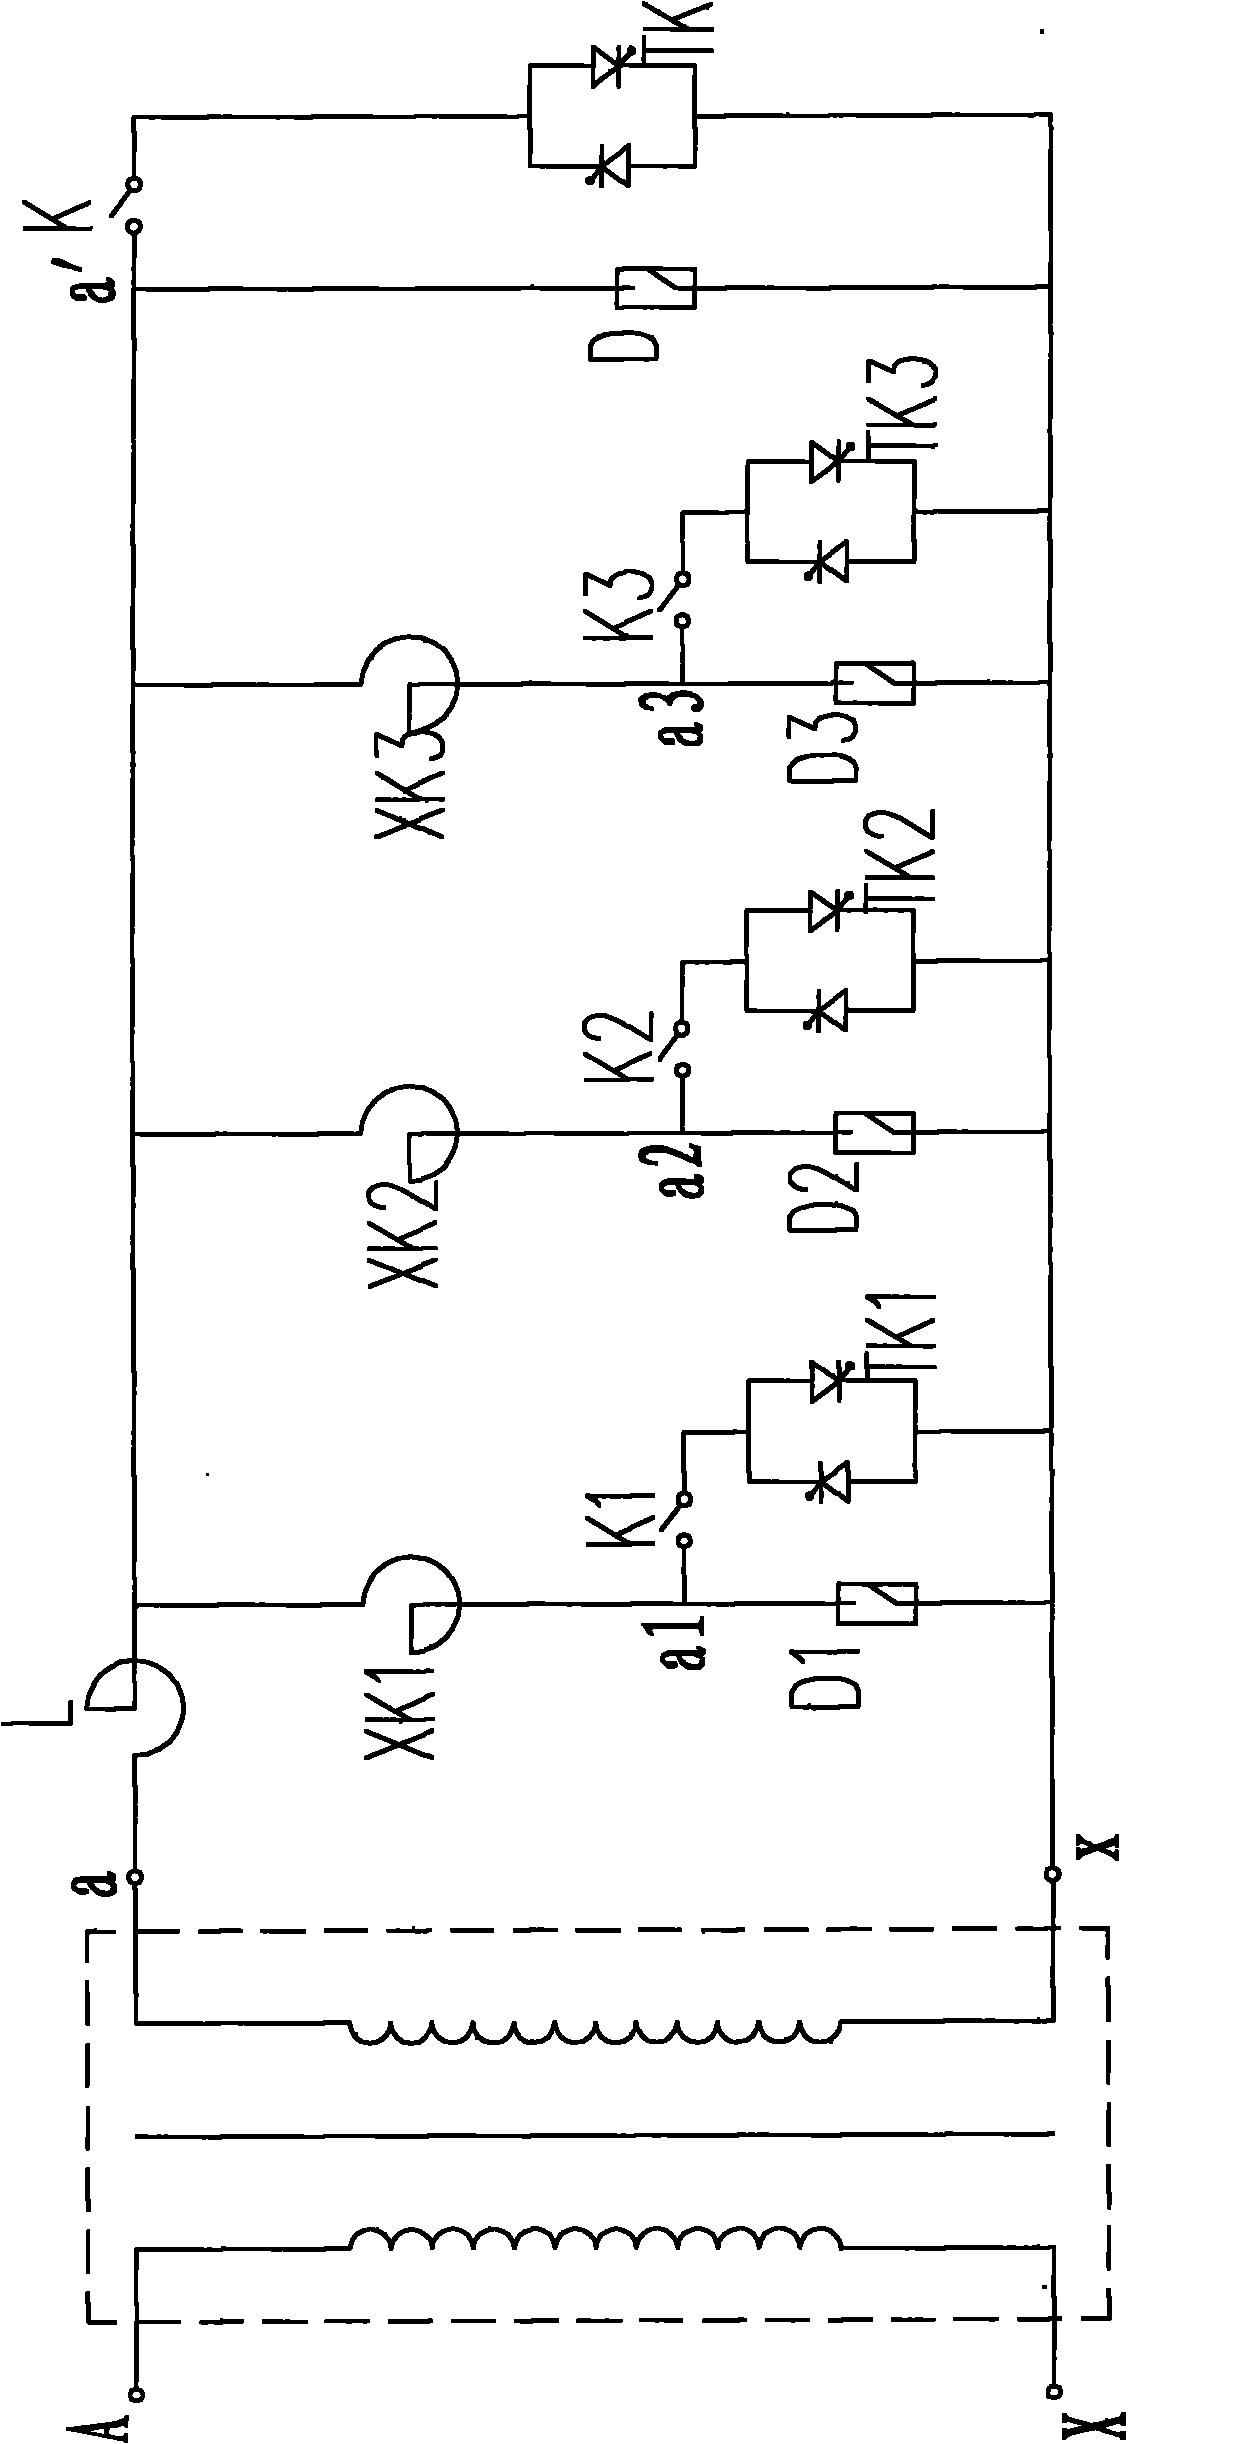 Alternating current (AC) stepped controllable single-phase/three-phase shunt reactor